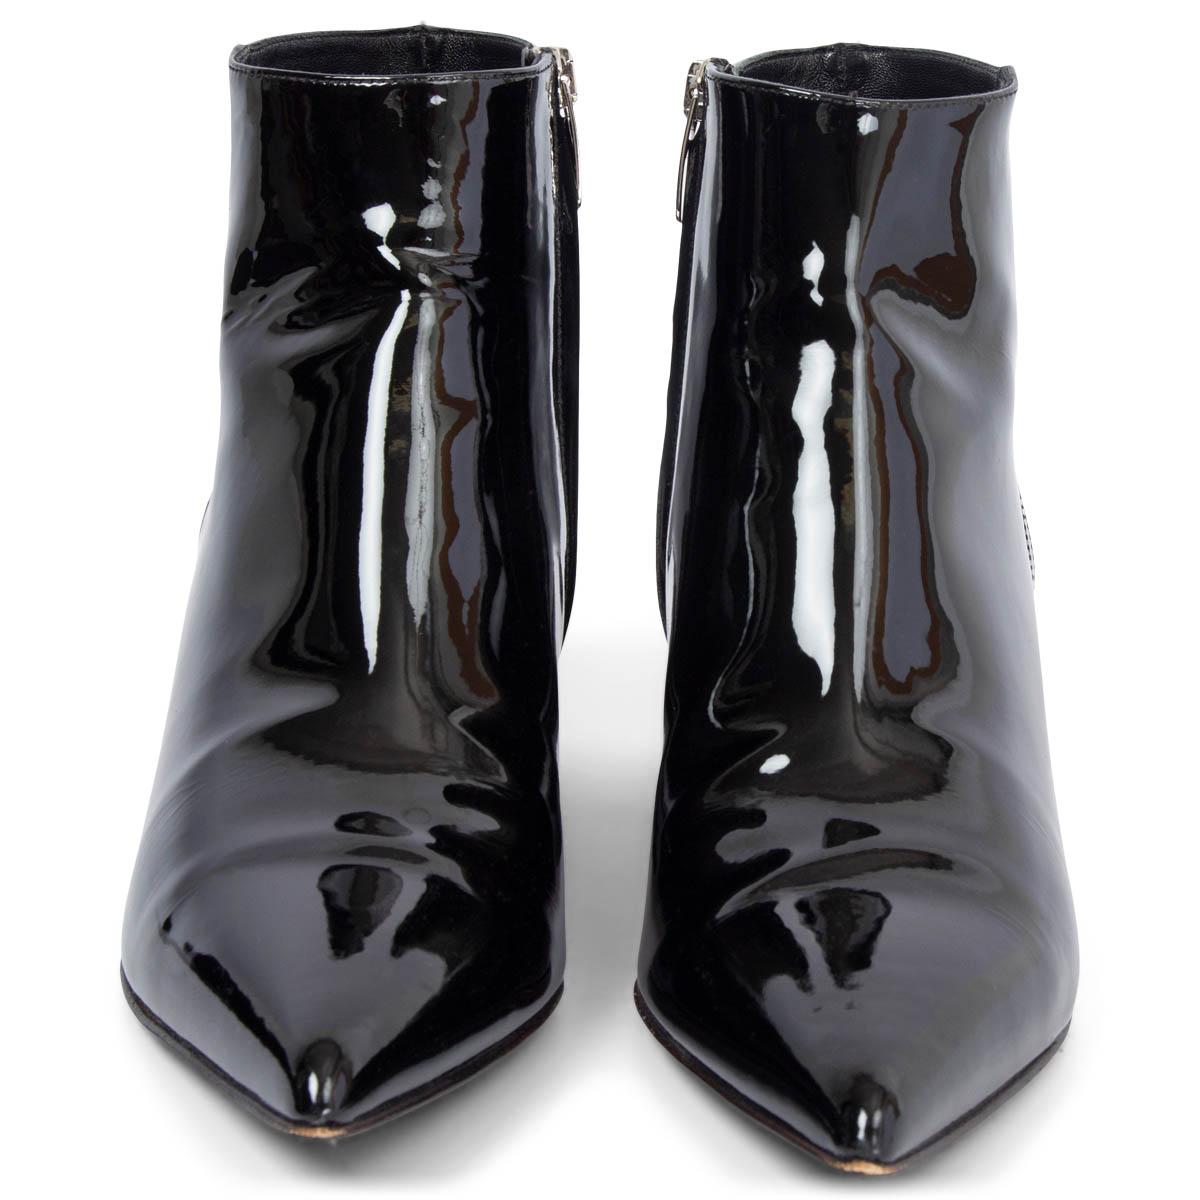 100% authentic Sergio Rossi pointed-toe ankle boots in black patent leather set on a block heel. Open with a zipper on the inside. Have been worn and are in excellent condition. 

Measurements
Imprinted Size	38
Shoe Size	38
Inside Sole	25cm